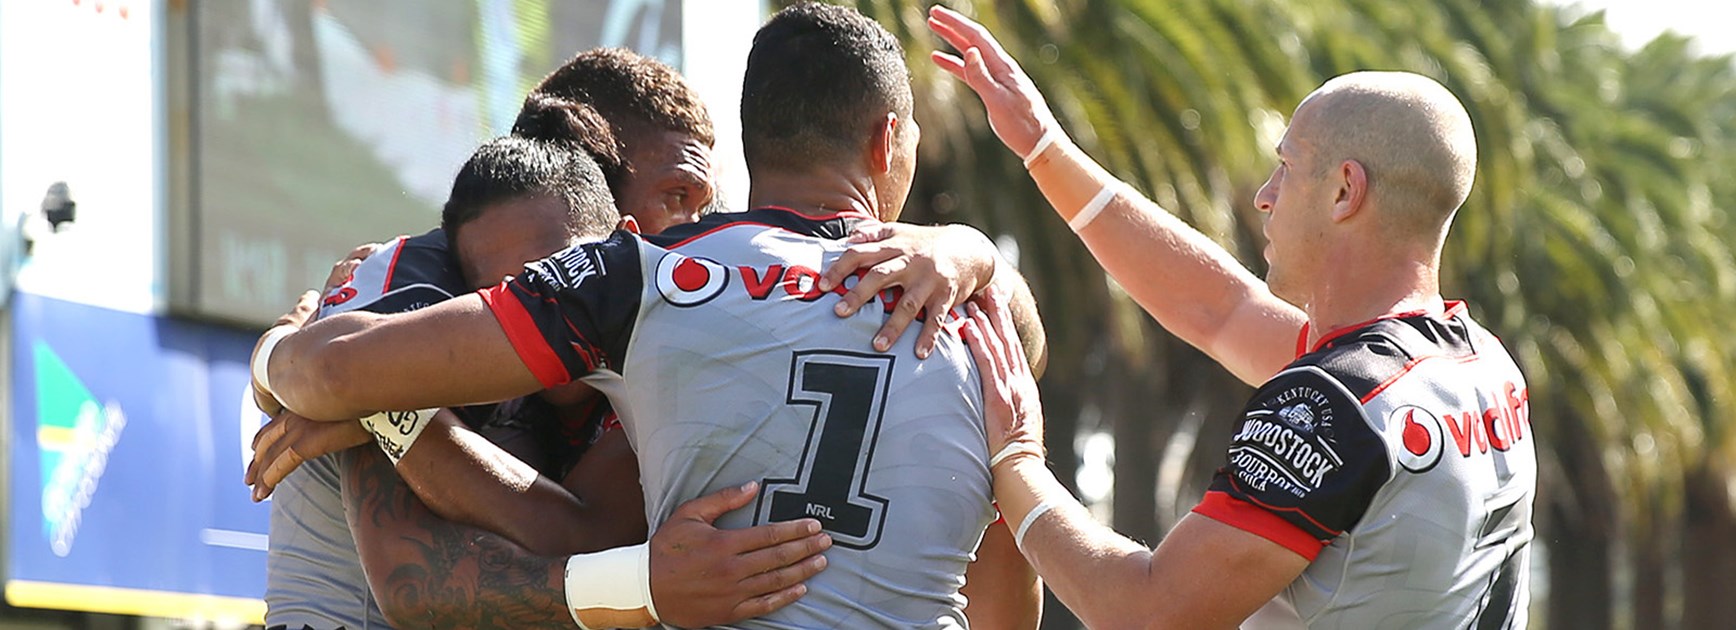 Warriors players celebrate a try against the Roosters in Round 5.